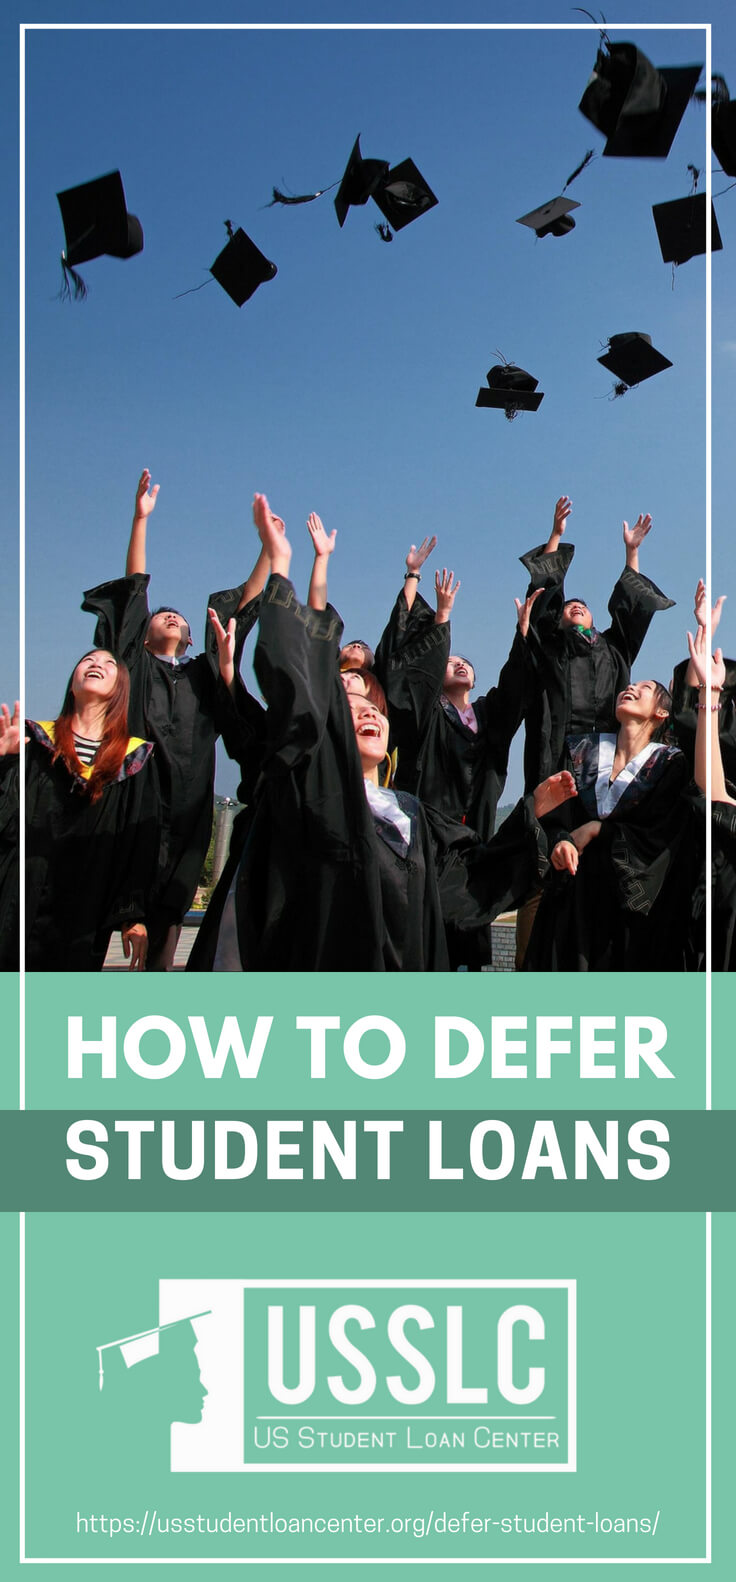 How to Defer Student Loans